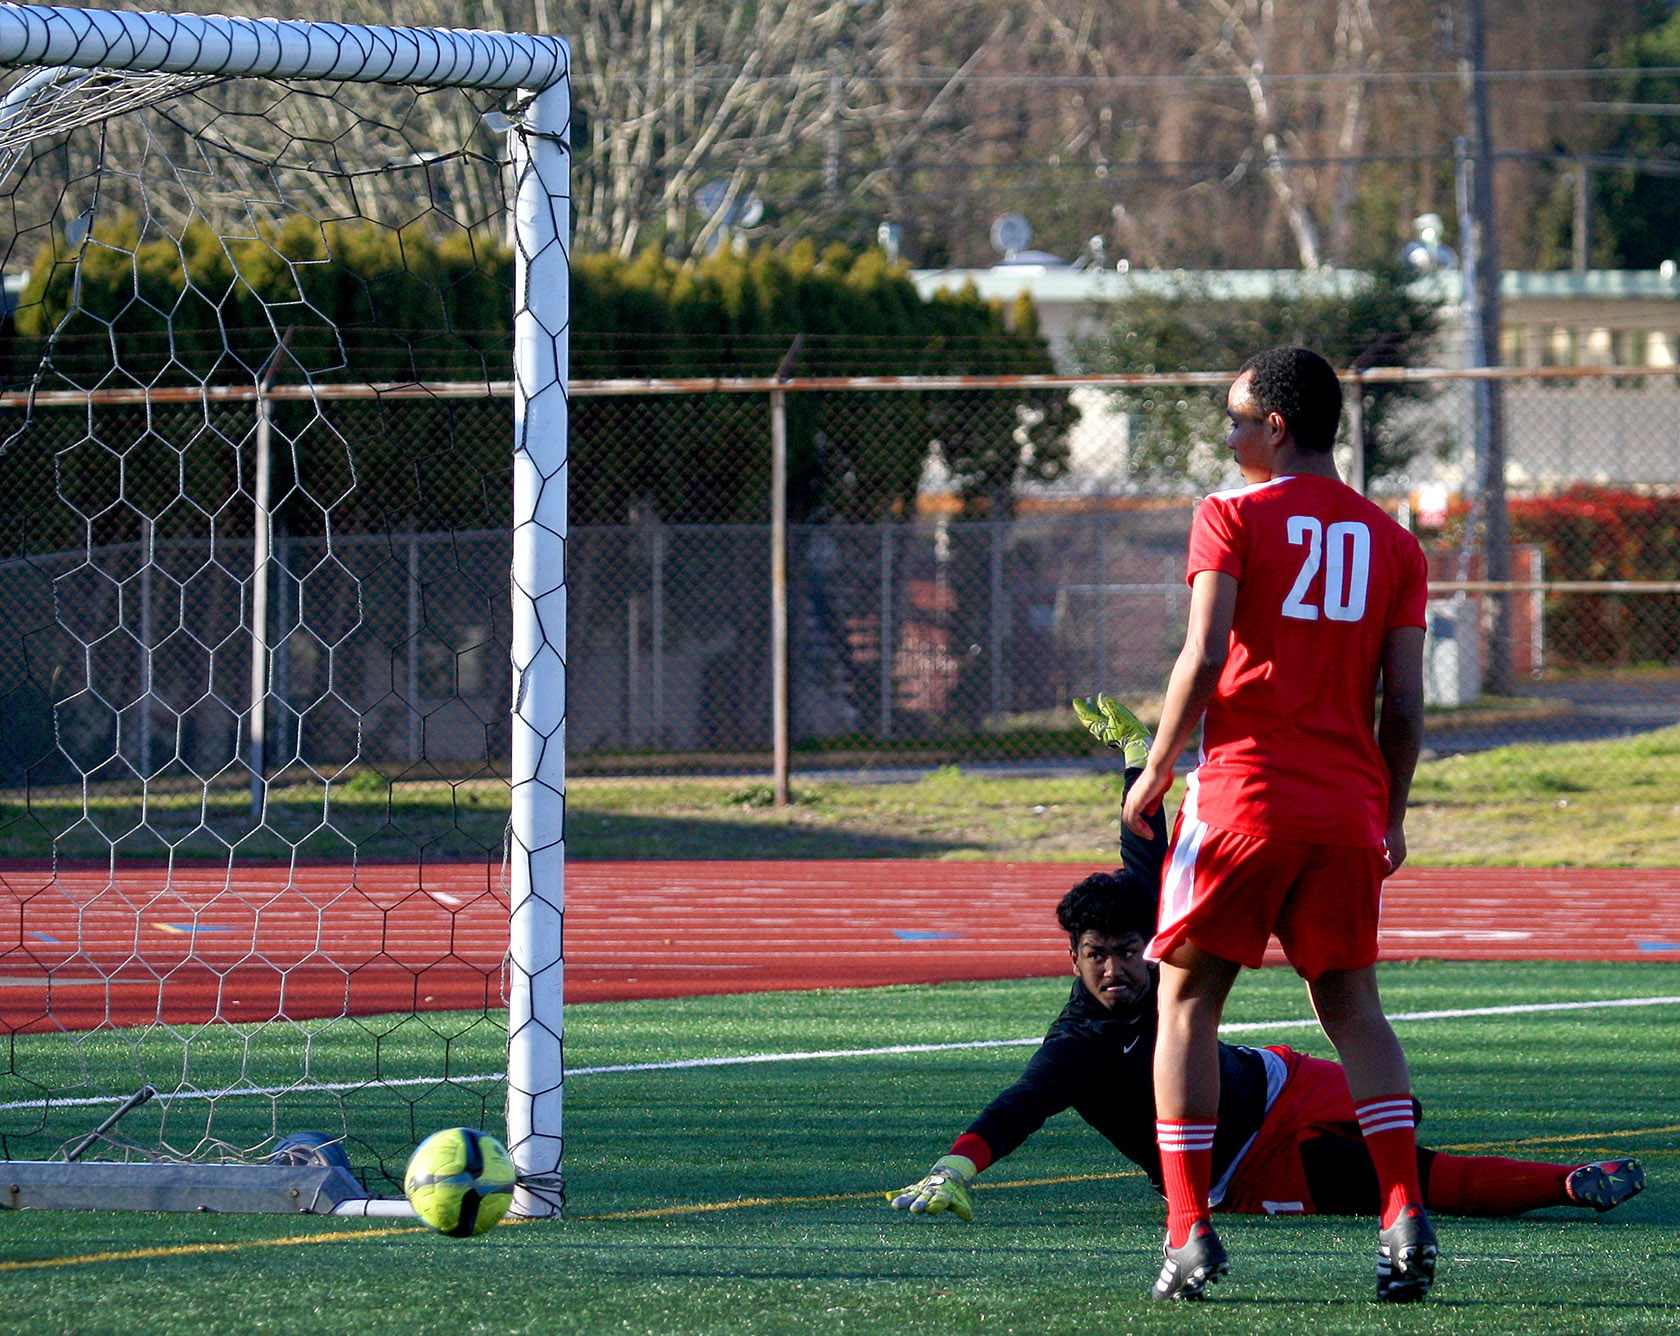 The ball rolls into the goal as Evergreen scores their first goal at 24:54 in the first half against Tyee's goalie Gurpall Singh.